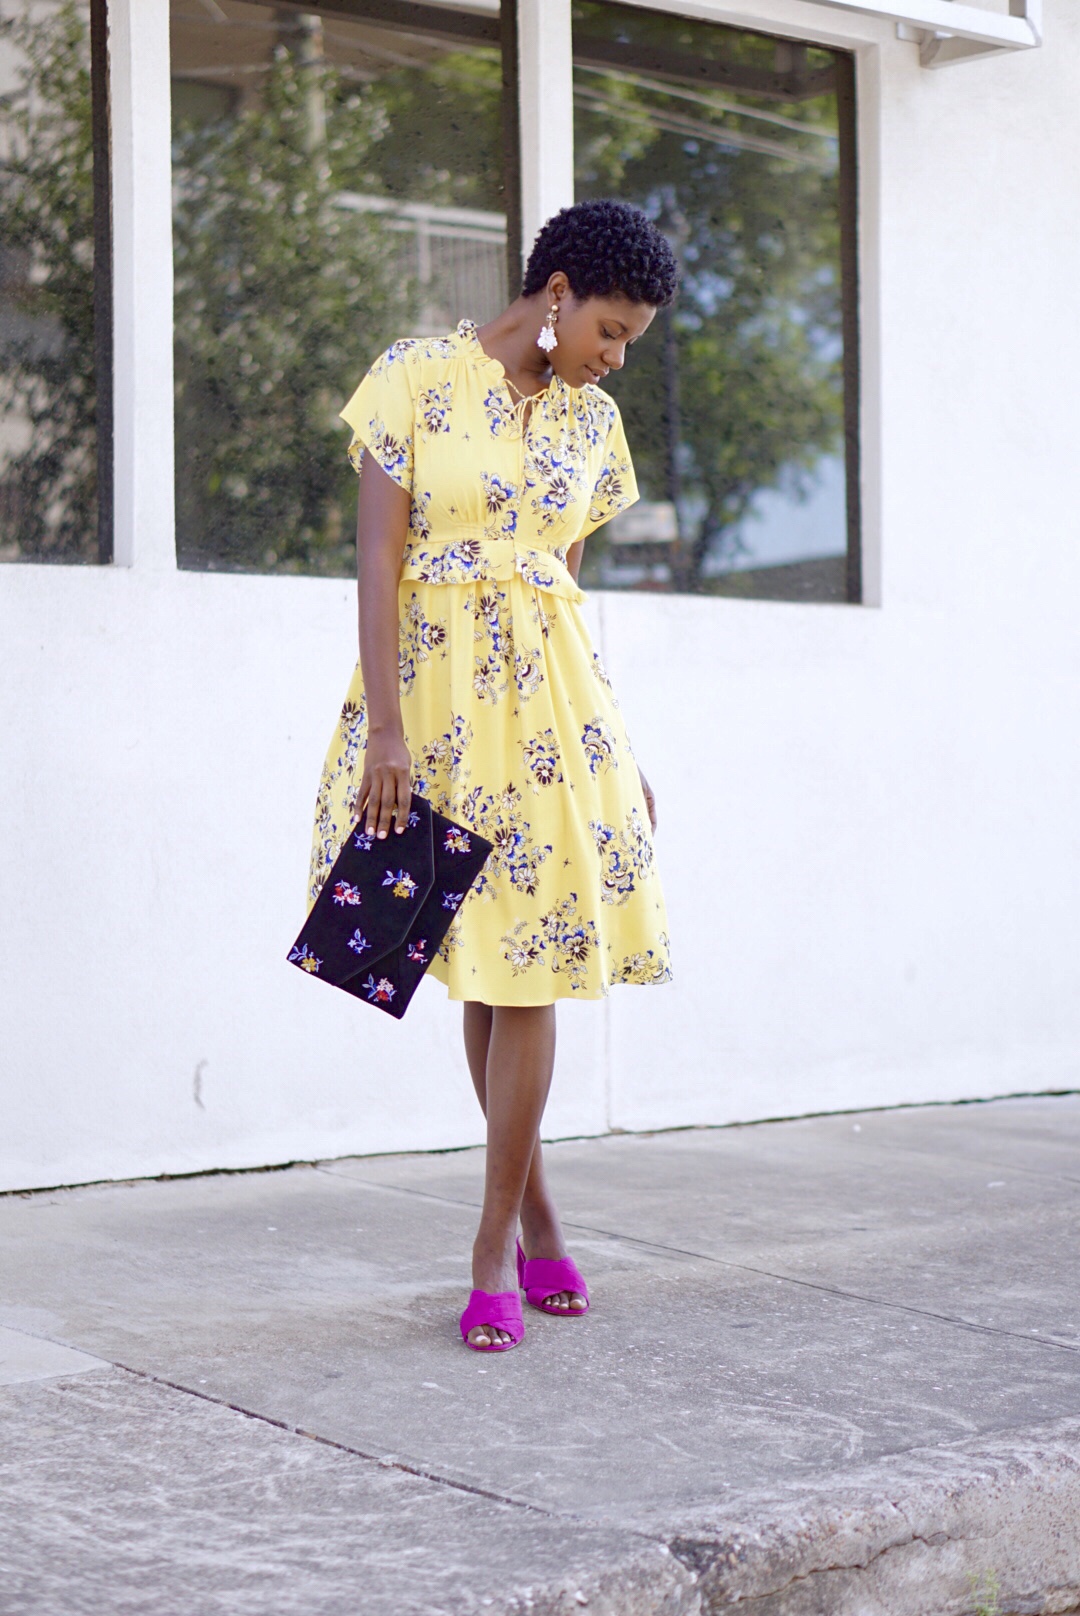 Ann taylor, boho floral midi dress, embroidered floral clutch, pink mules, twa, short natural hair